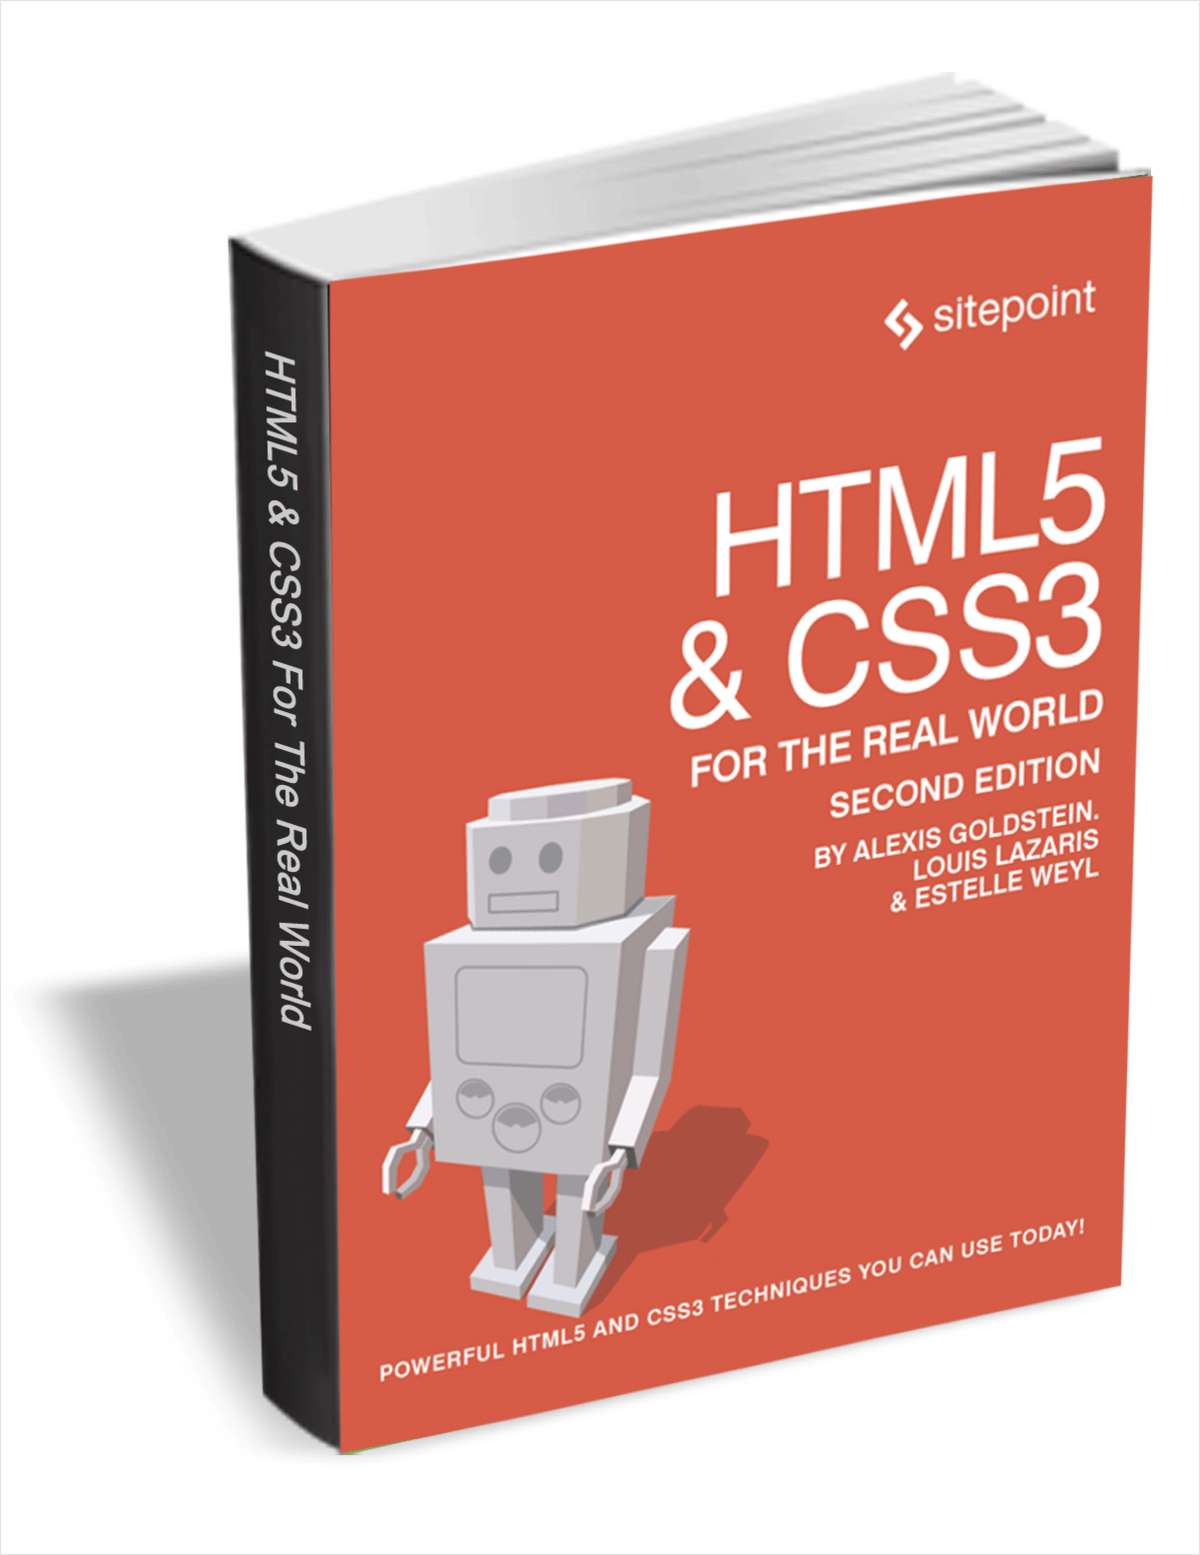 HTML5 & CSS3 for the Real World: 2nd Edition (A $30 Value, FREE)